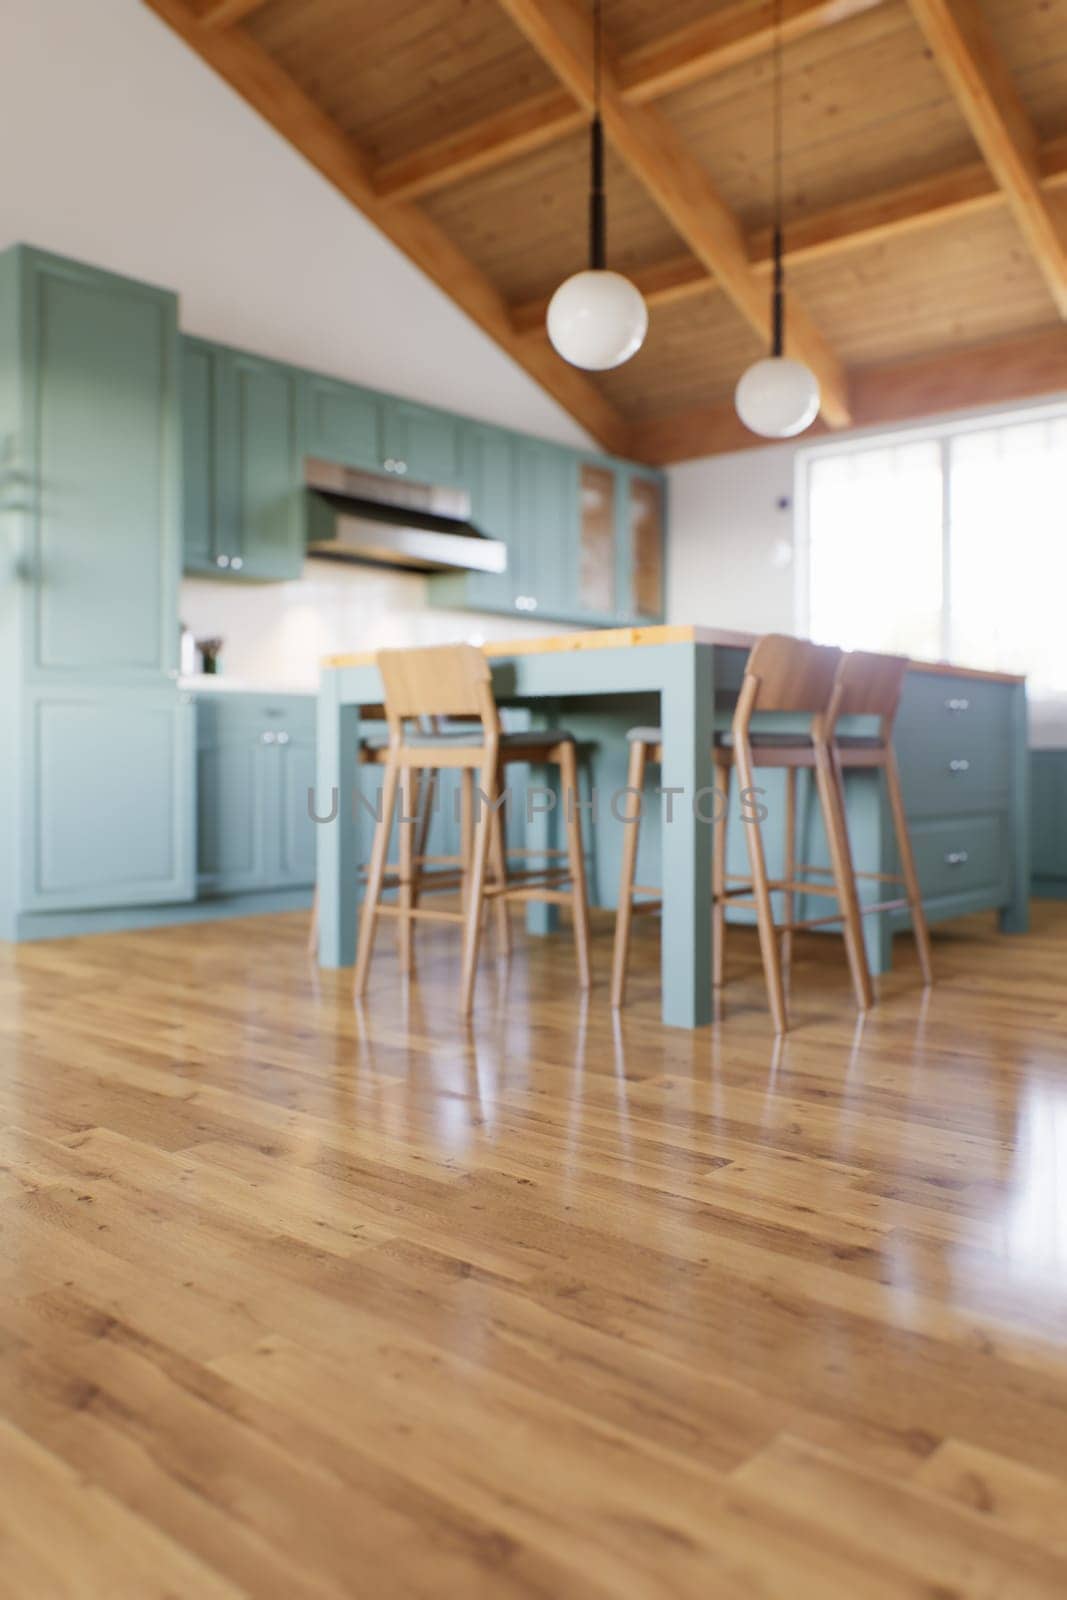 The large green kitchen is out of focus. Green kitchen interior in bokeh with an emphasis on wooden floor. 3D rendering